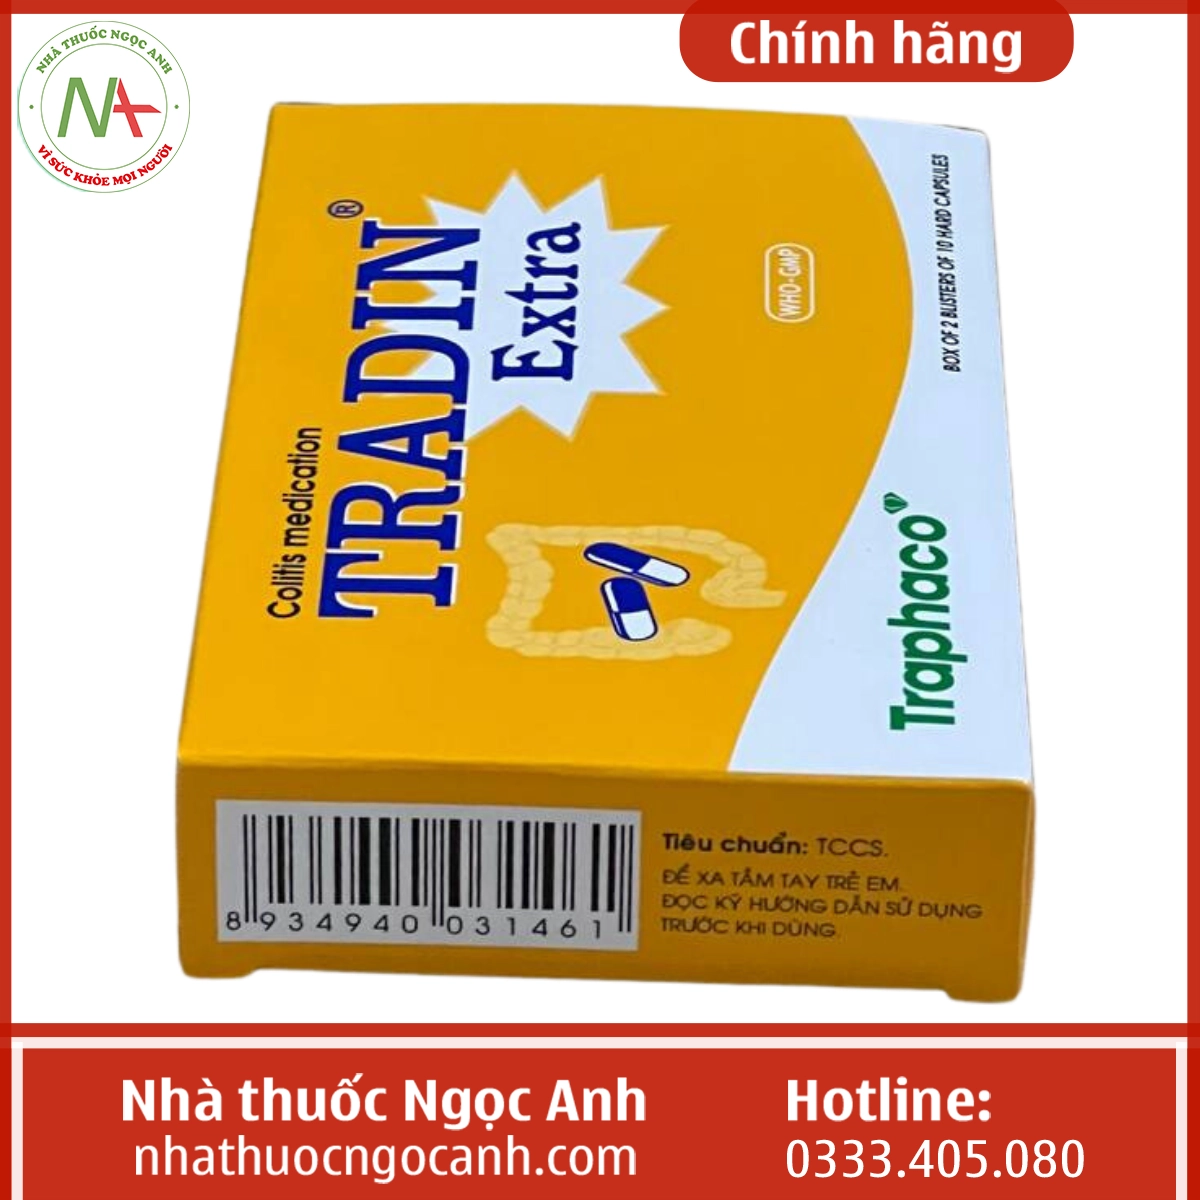 Hộp thuốc Tradin Extra